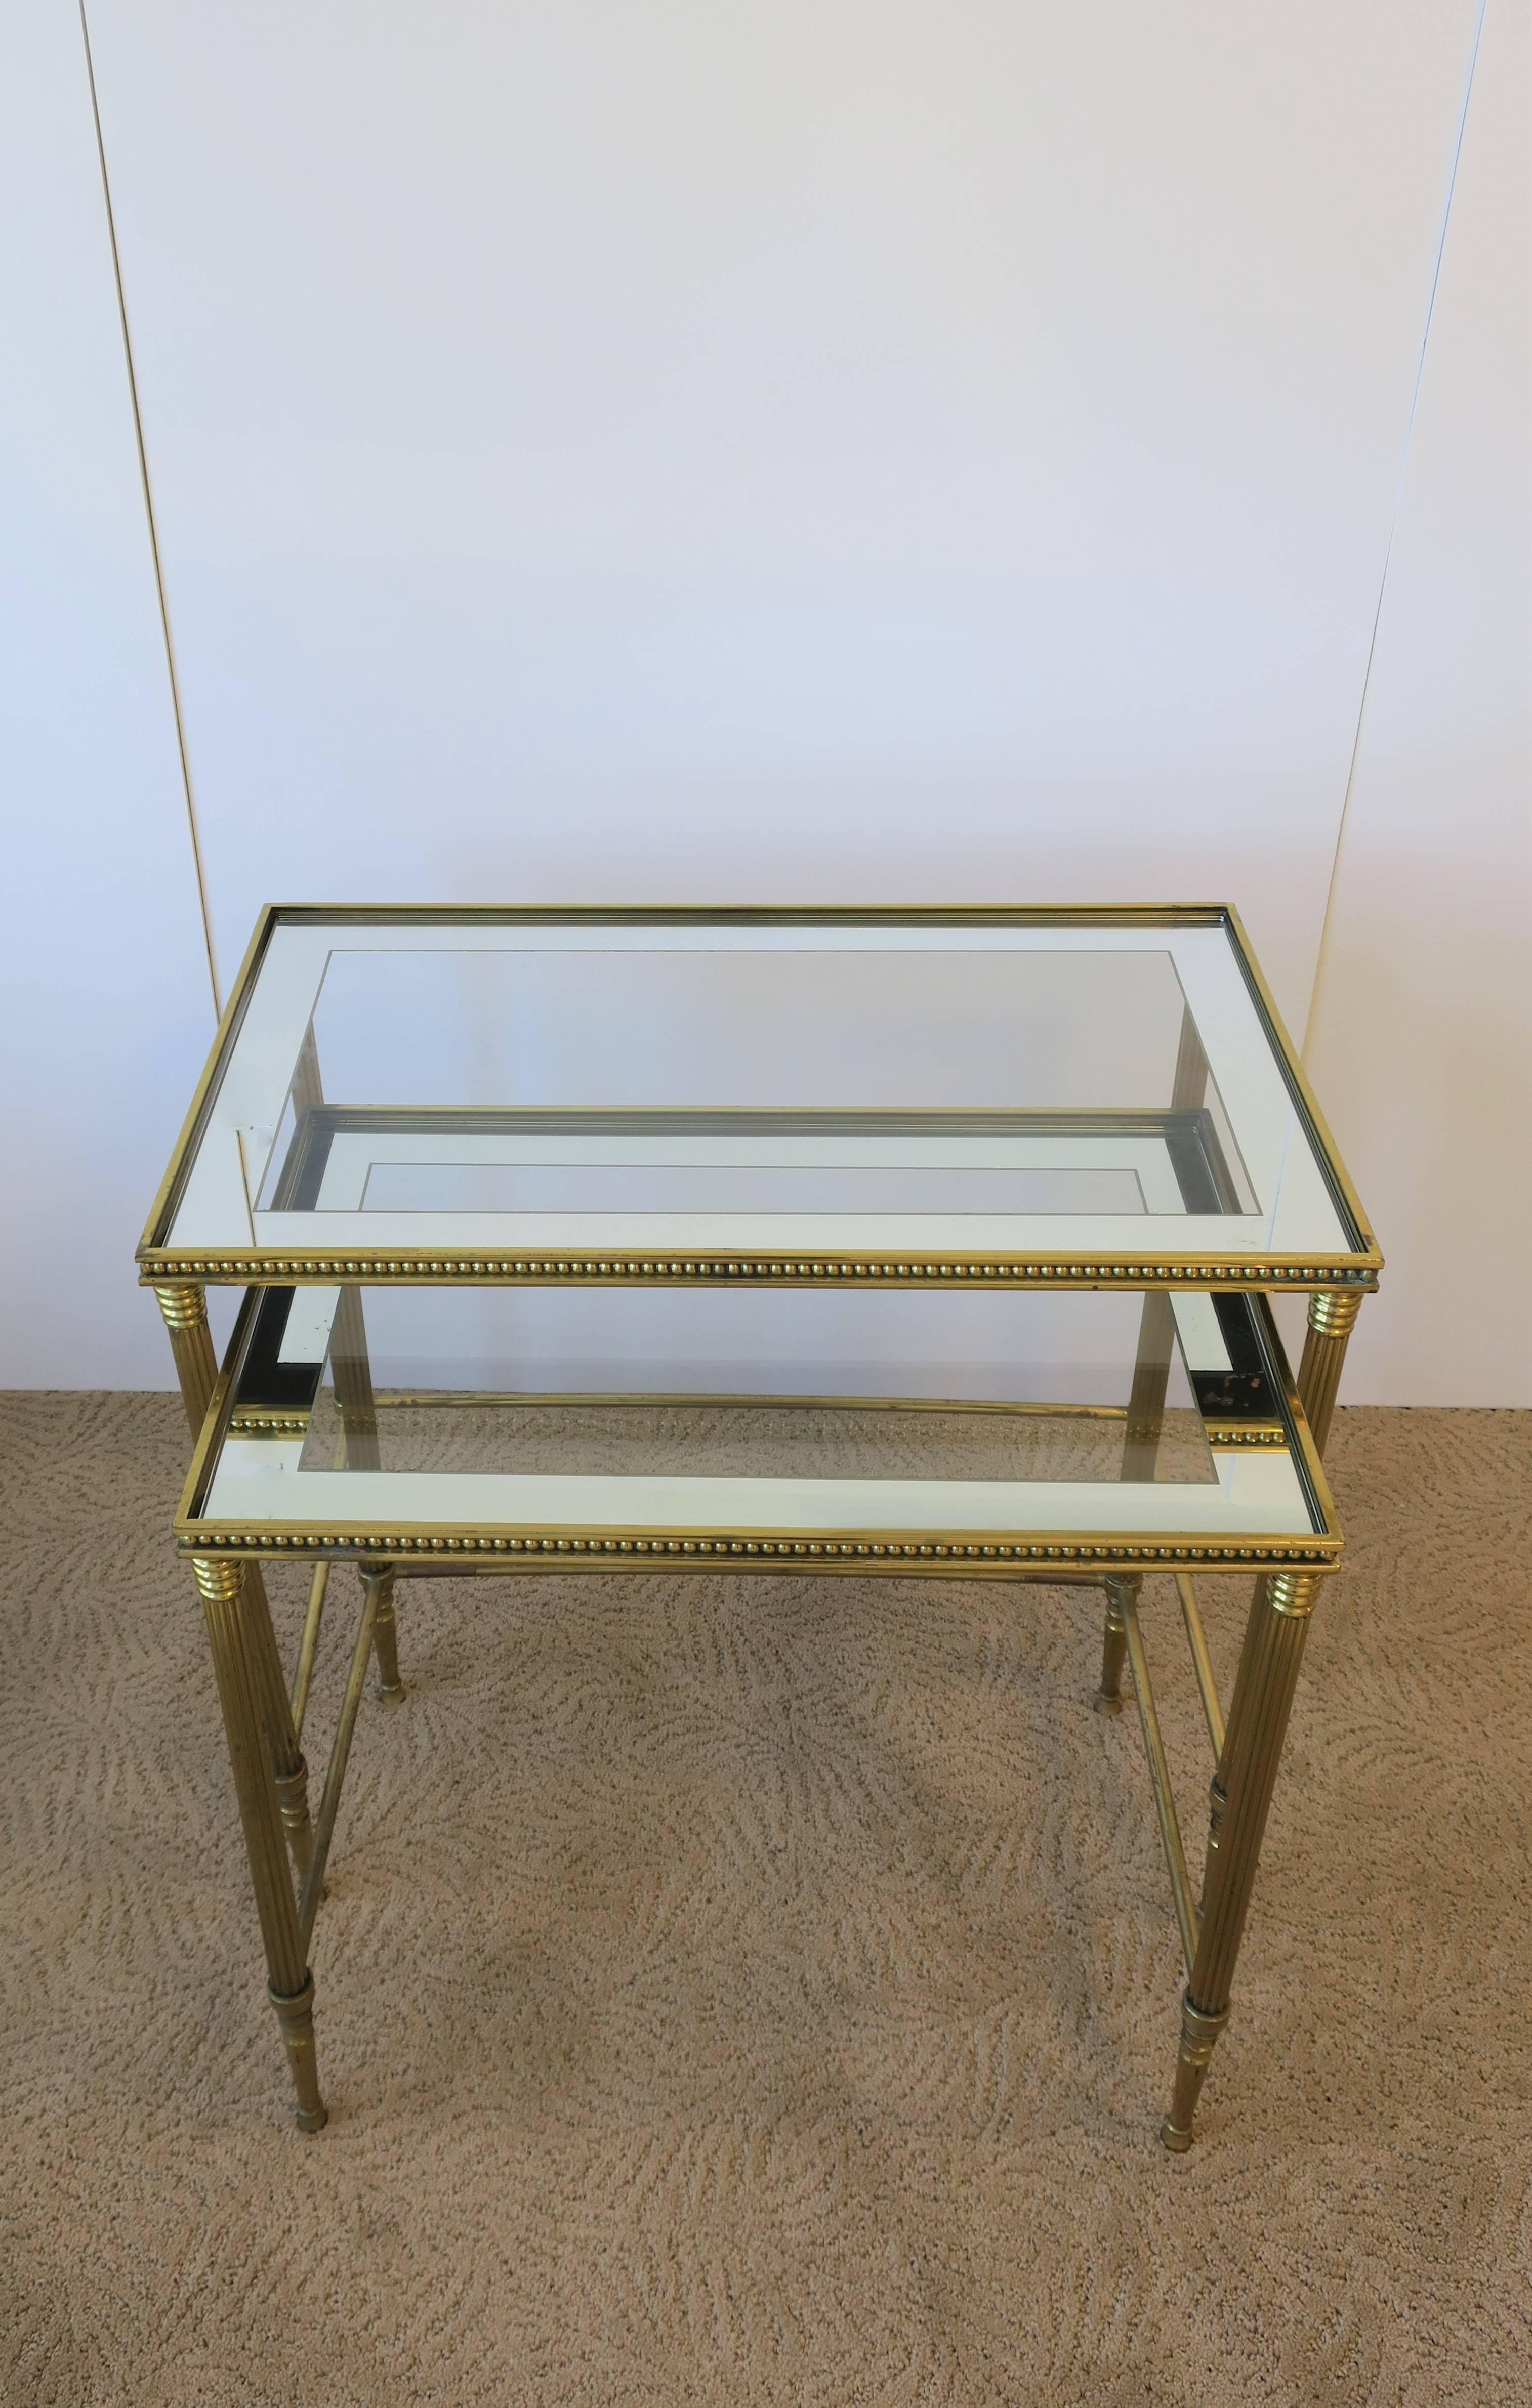 A vintage set of Neoclassical Italian brass and glass nesting tables or end tables, Italy, circa 1960. Glass top with mirrored edge. In the style of Maison Bagues. 

Measurements:
20.5 in. H x 23.25 in. W x 13.75 in. D
18.5 in. H x 20 in. W x 13